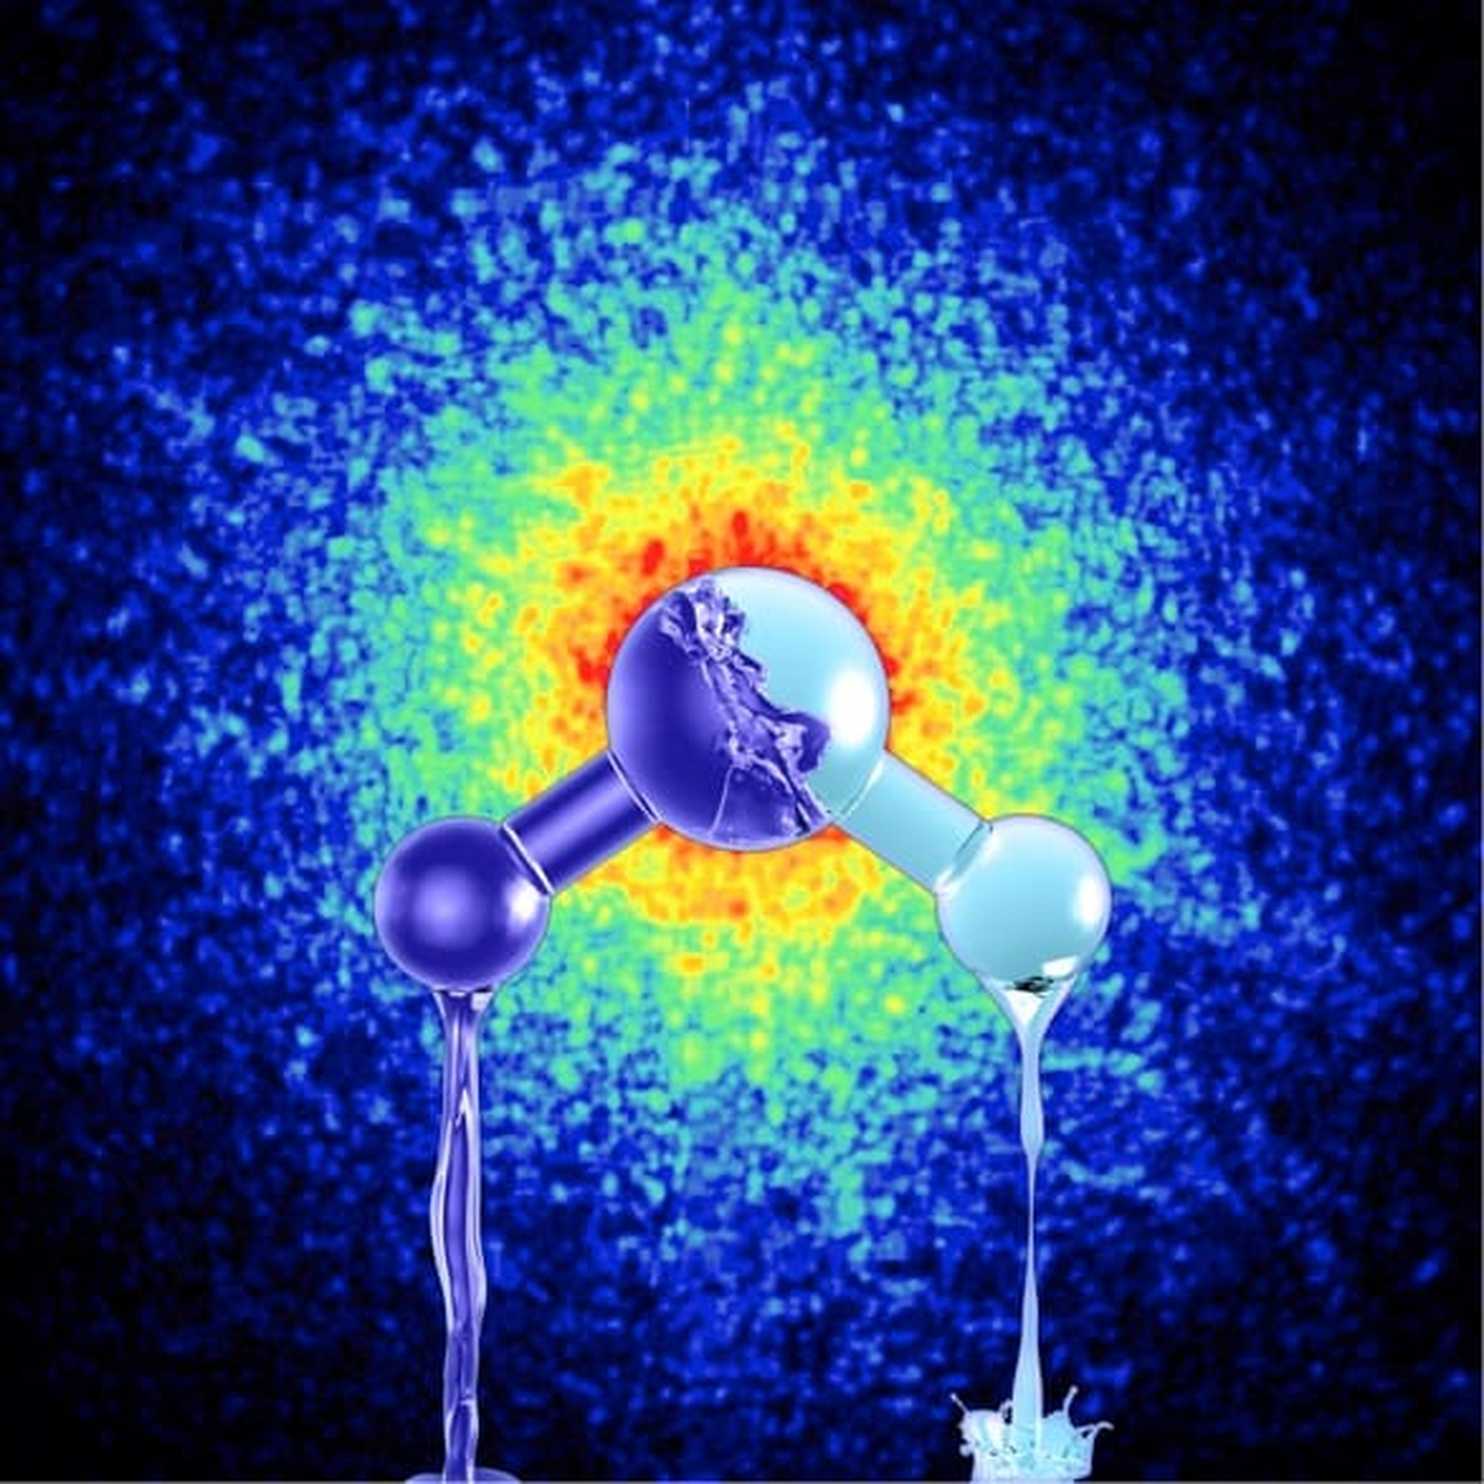 https://images.washingtonpost.com/?url=http://www.washingtonpost.com/news/speaking-of-science/wp-content/uploads/sites/36/2017/06/2-forms_ultra-viscous-liquid-water-w-different-density-the-background-is-the-x-ray-speckle-pattern-taken-from-actual-data-of-high-density-amorphous-ice-which-is-produced-by-pressurizing-water-at-very-low-t-Mattias-Karlen.jpg&w=1484&op=resize&opt=1&filter=antialias&t=20170517